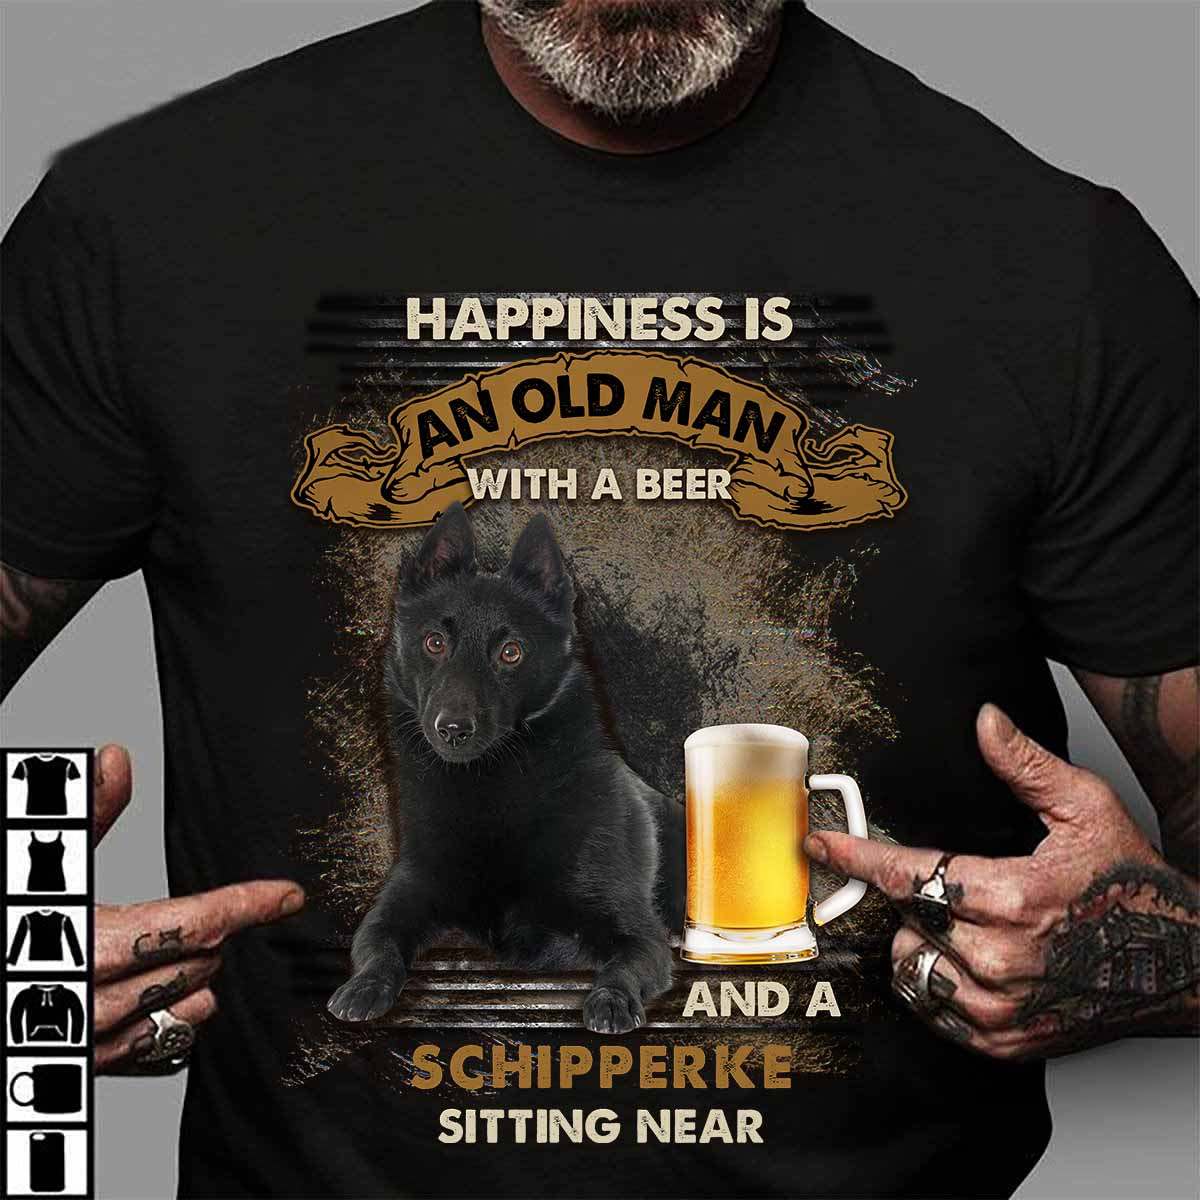 Happiness is an old man with a beer and a Schipperke sitting near - T-shirt for beer lover